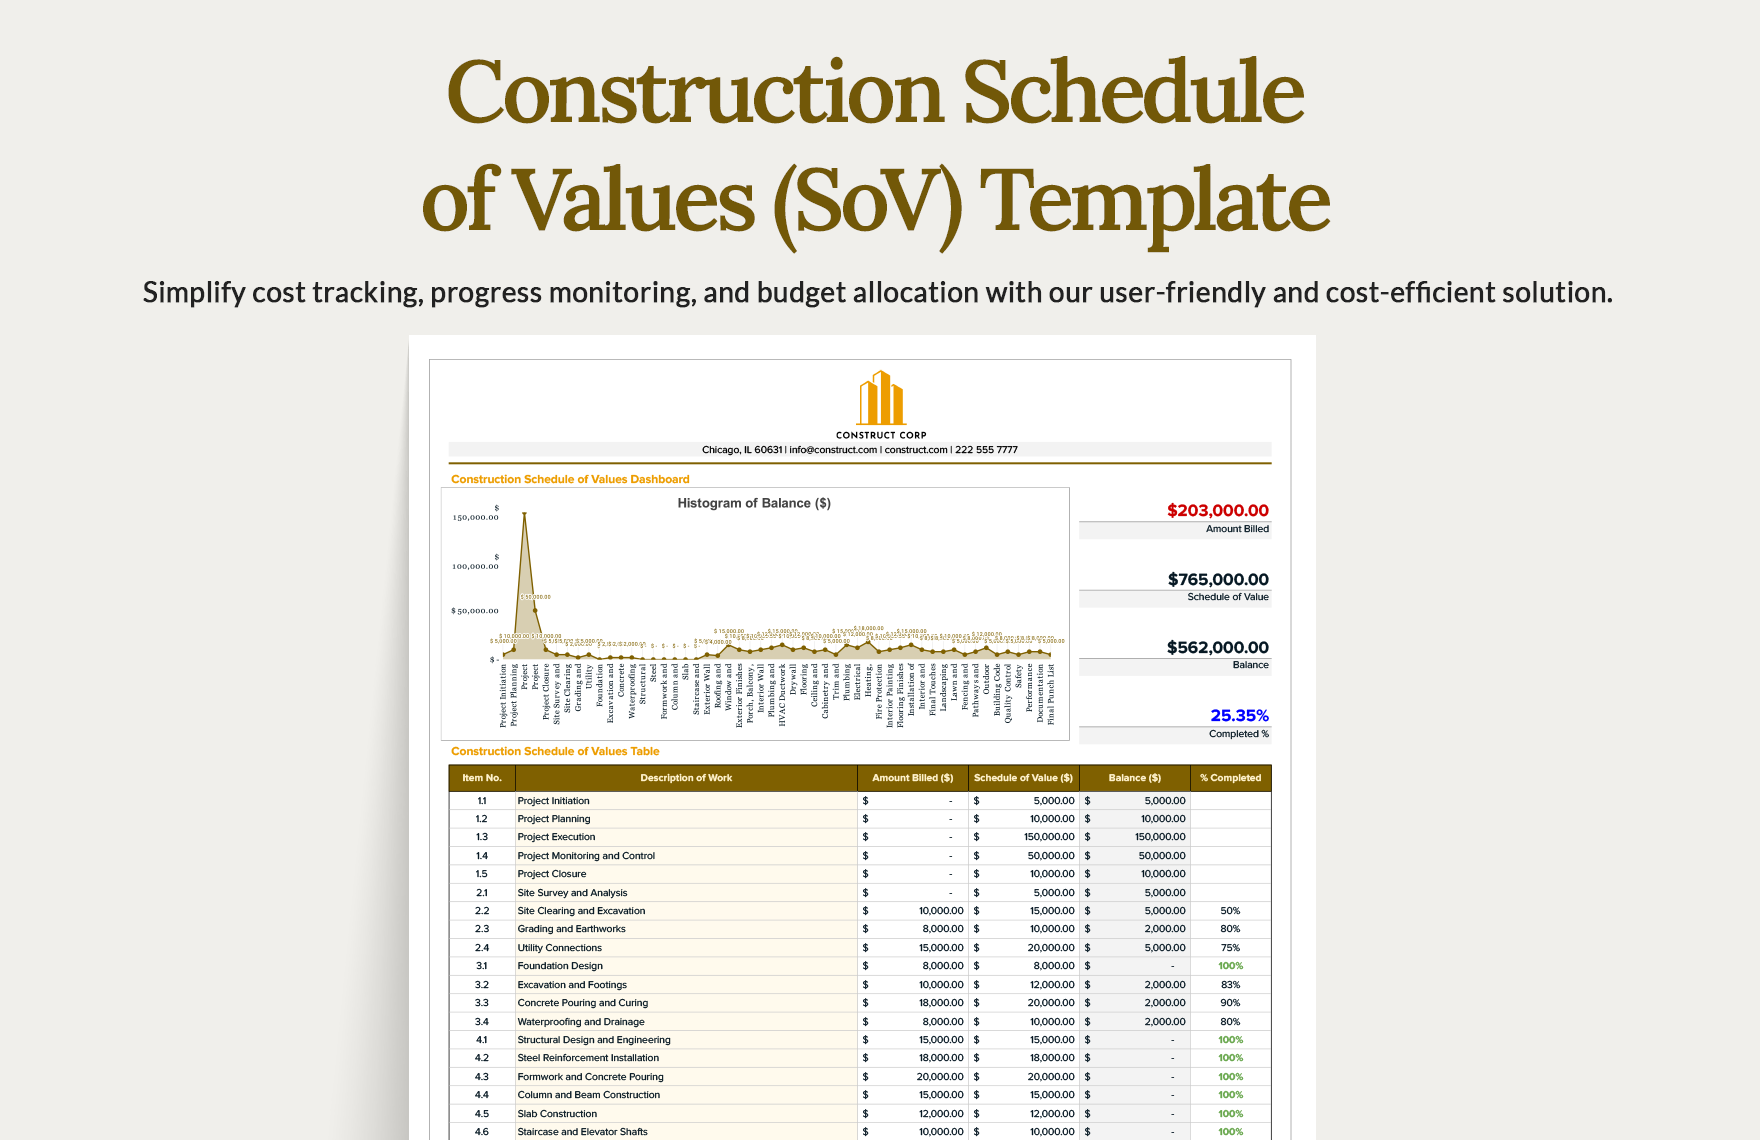 Construction Schedule of Values (SoV) Template Download in Excel